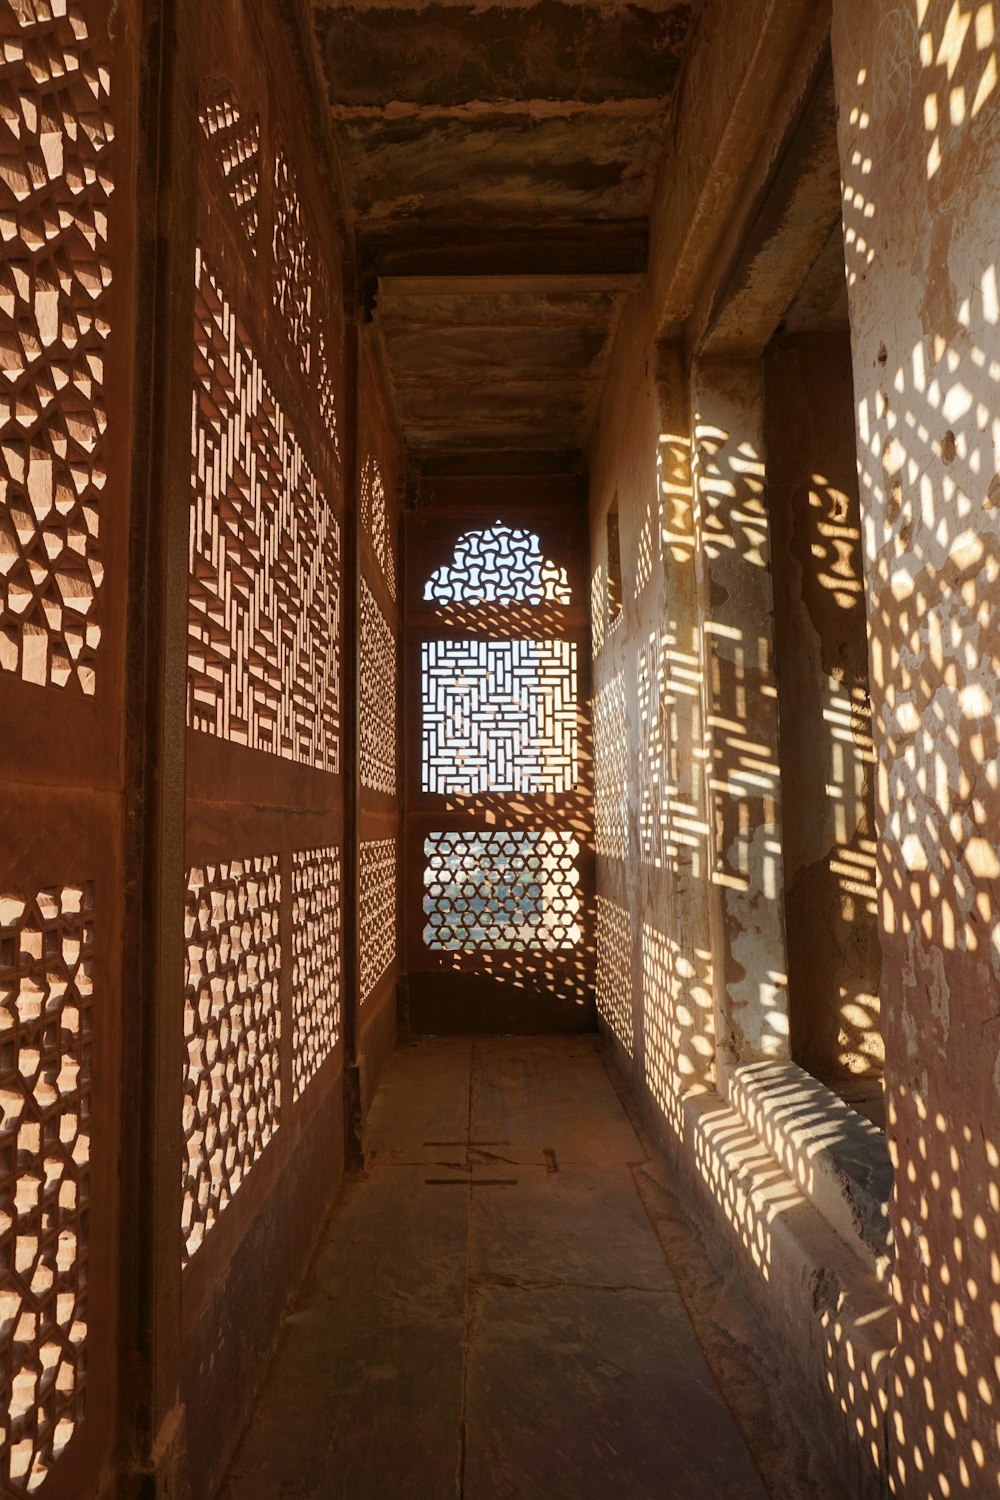 a long hallway with intricate carved screens on the walls